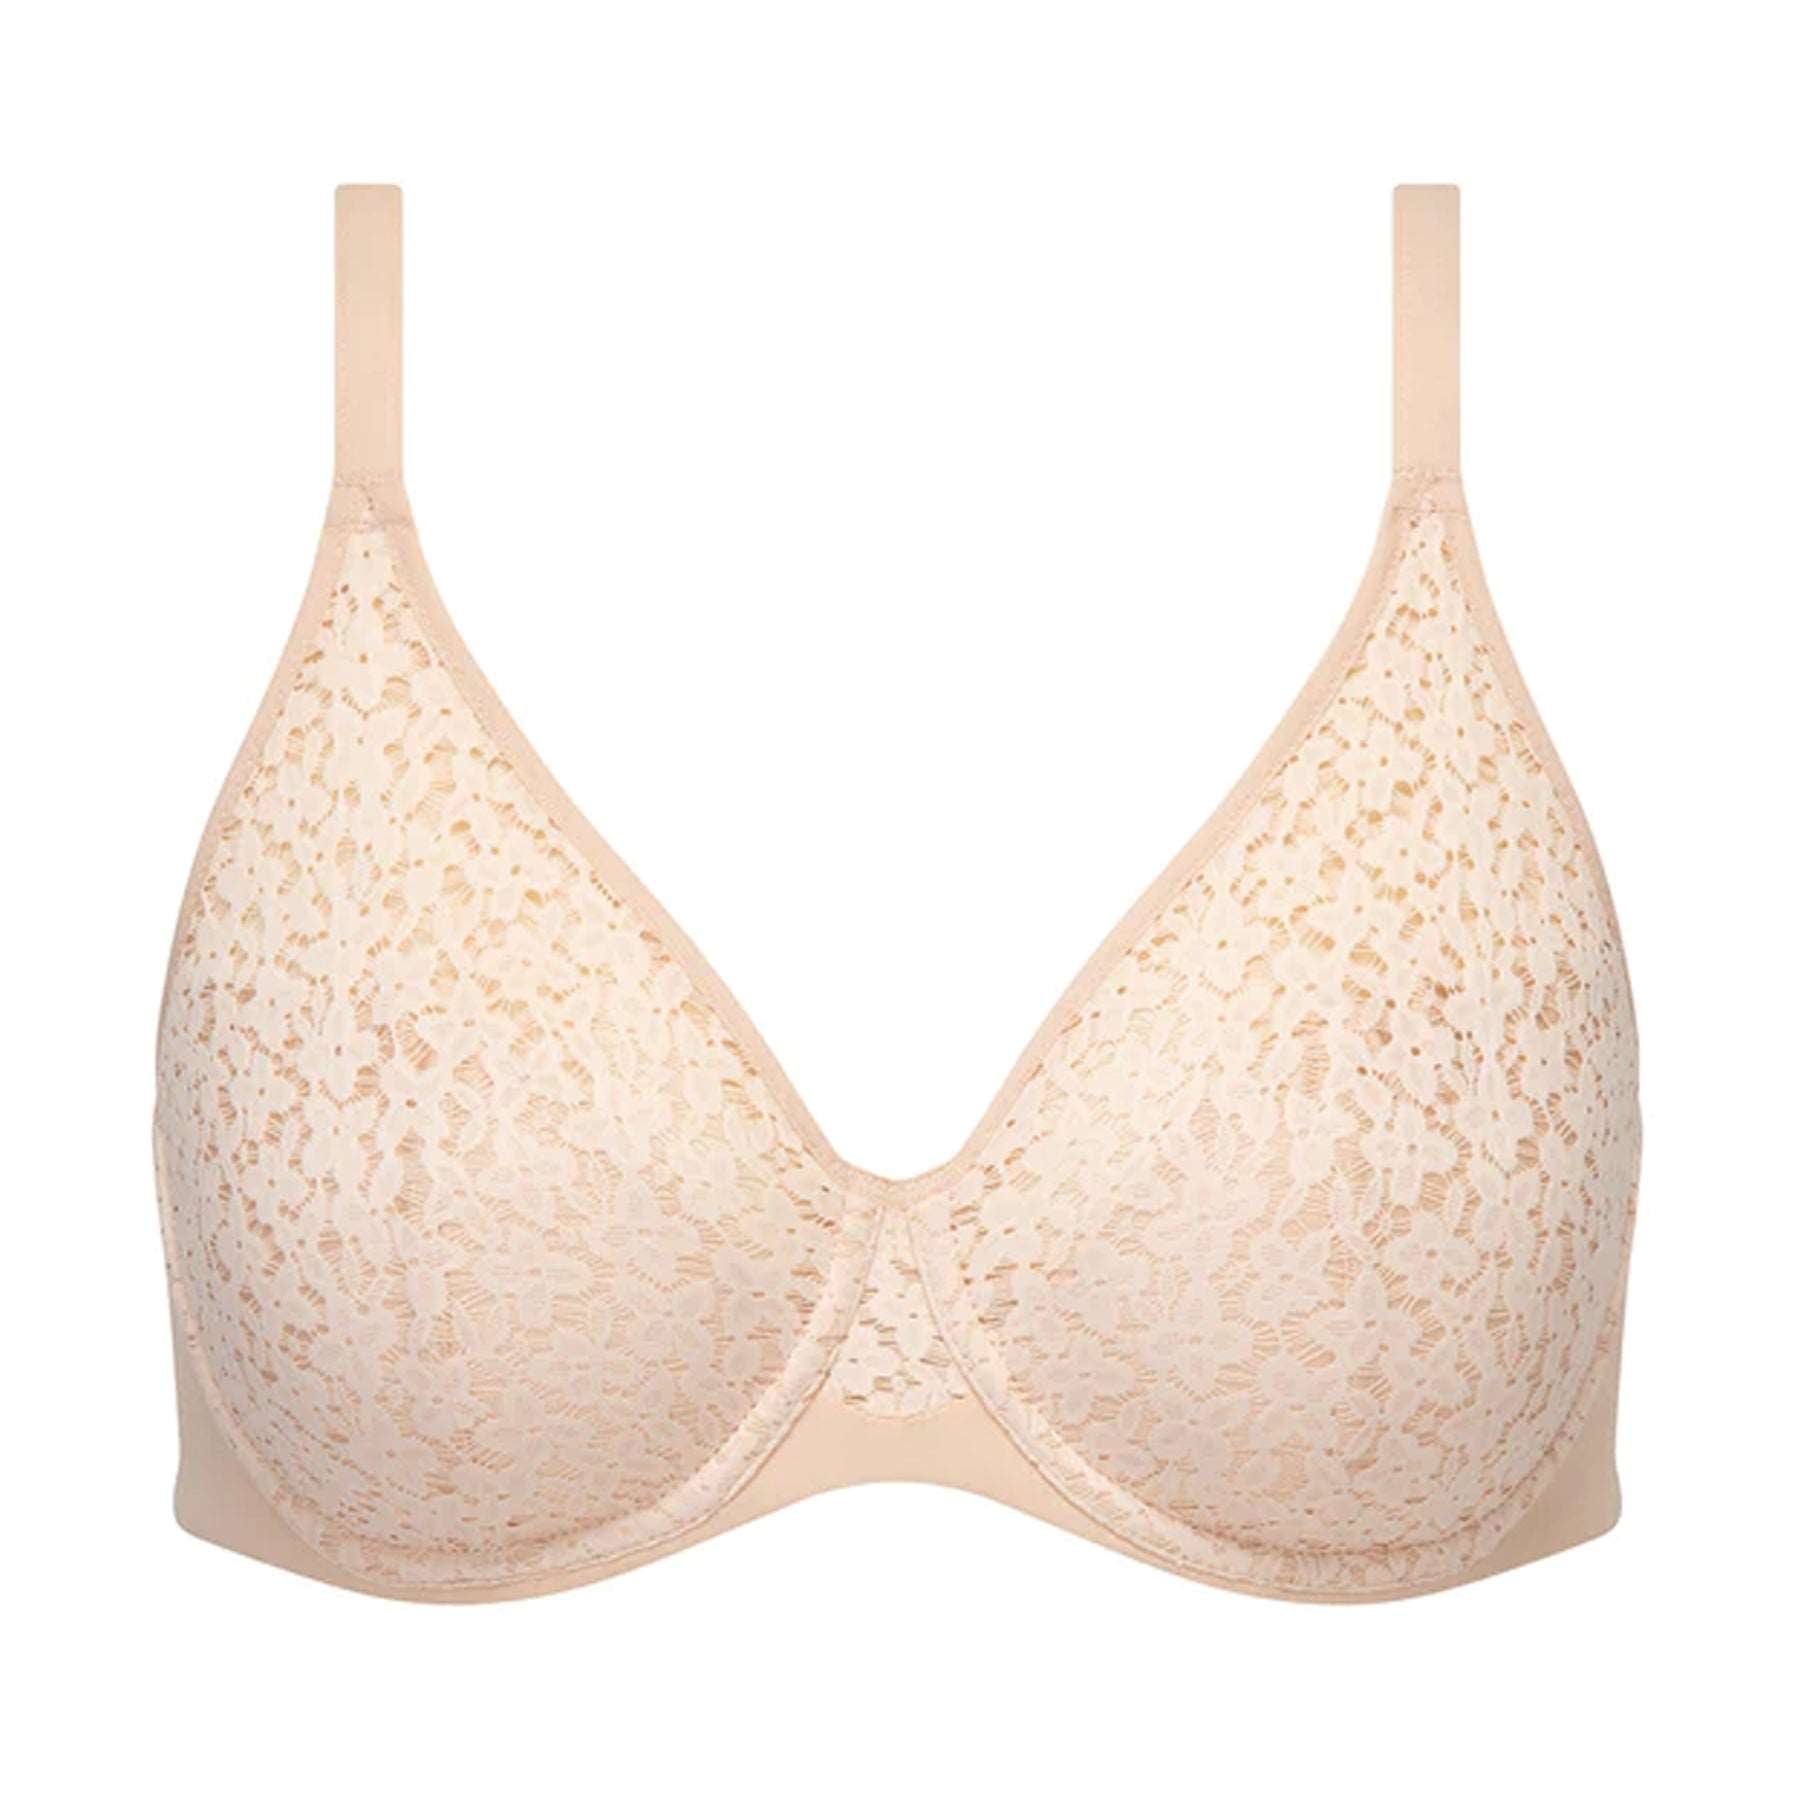 Chantelle Every Curve Full Coverage Unlined Bra